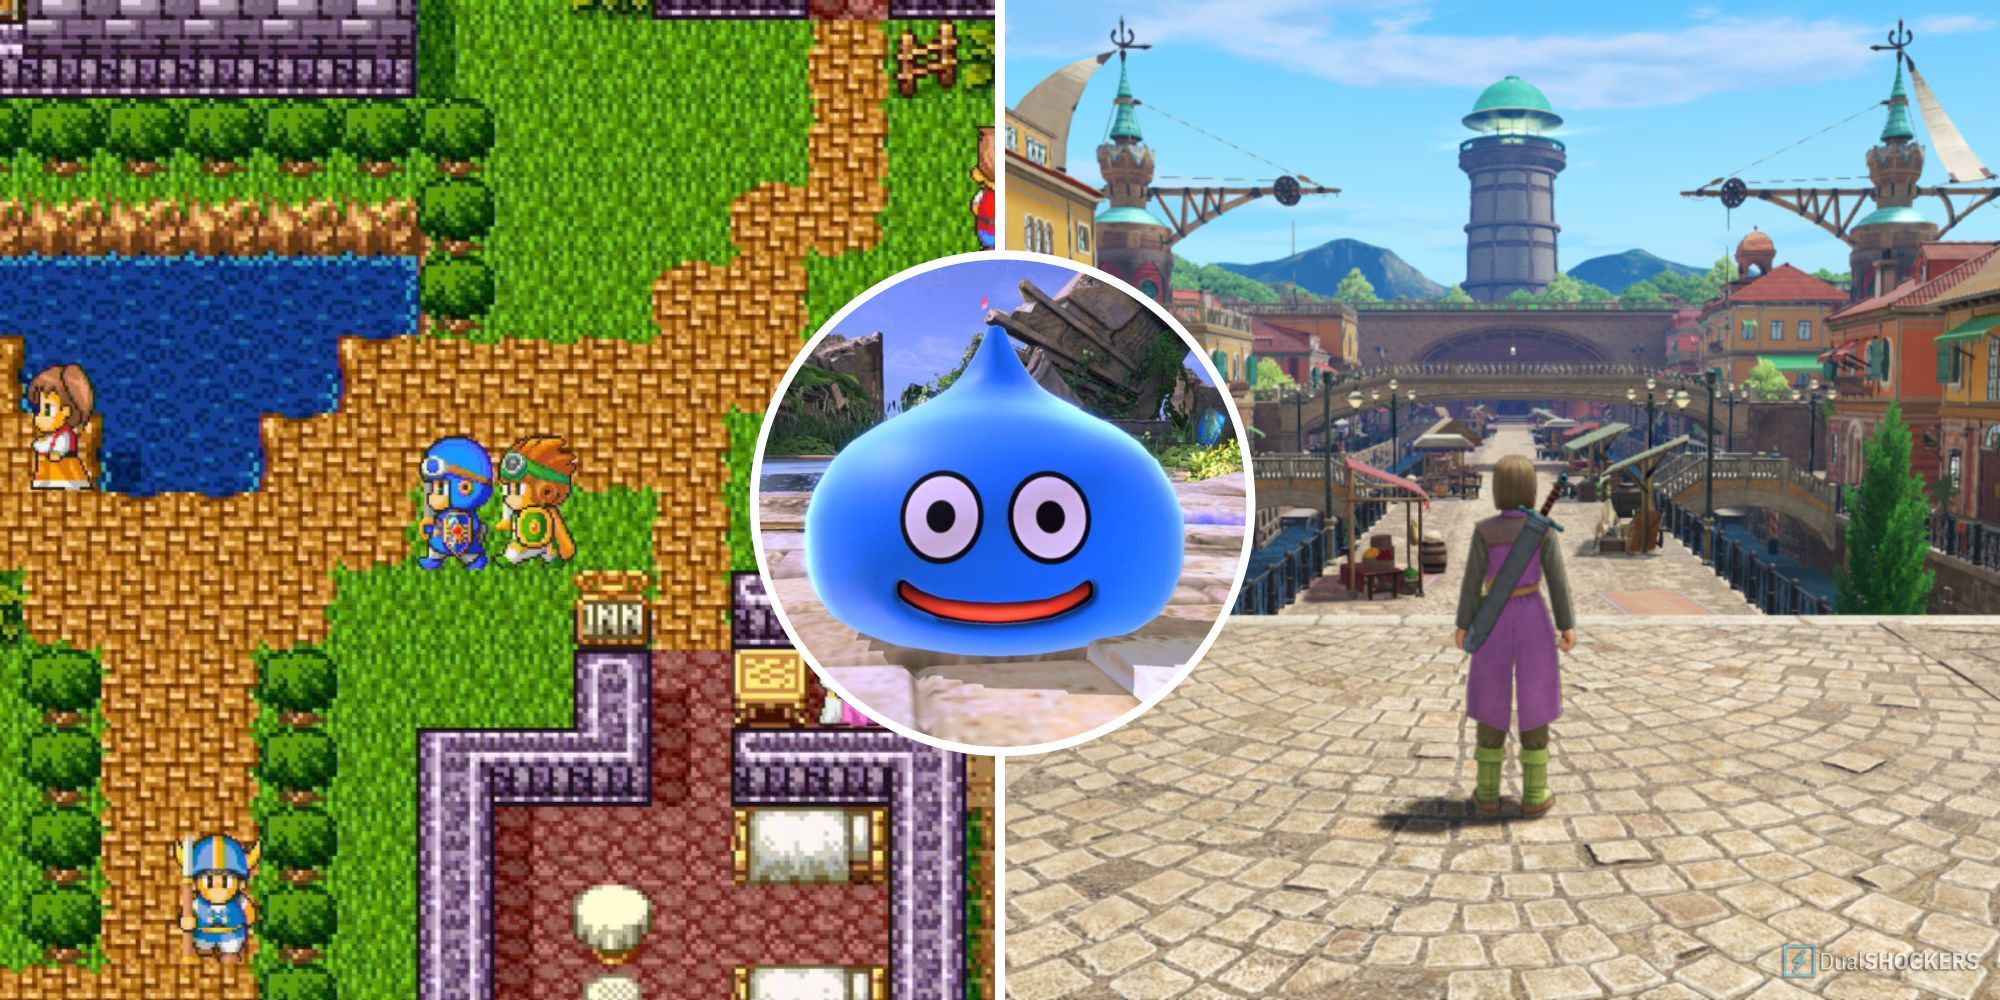 All Mainline Dragon Quest Games Ranked (According To Metacritic)